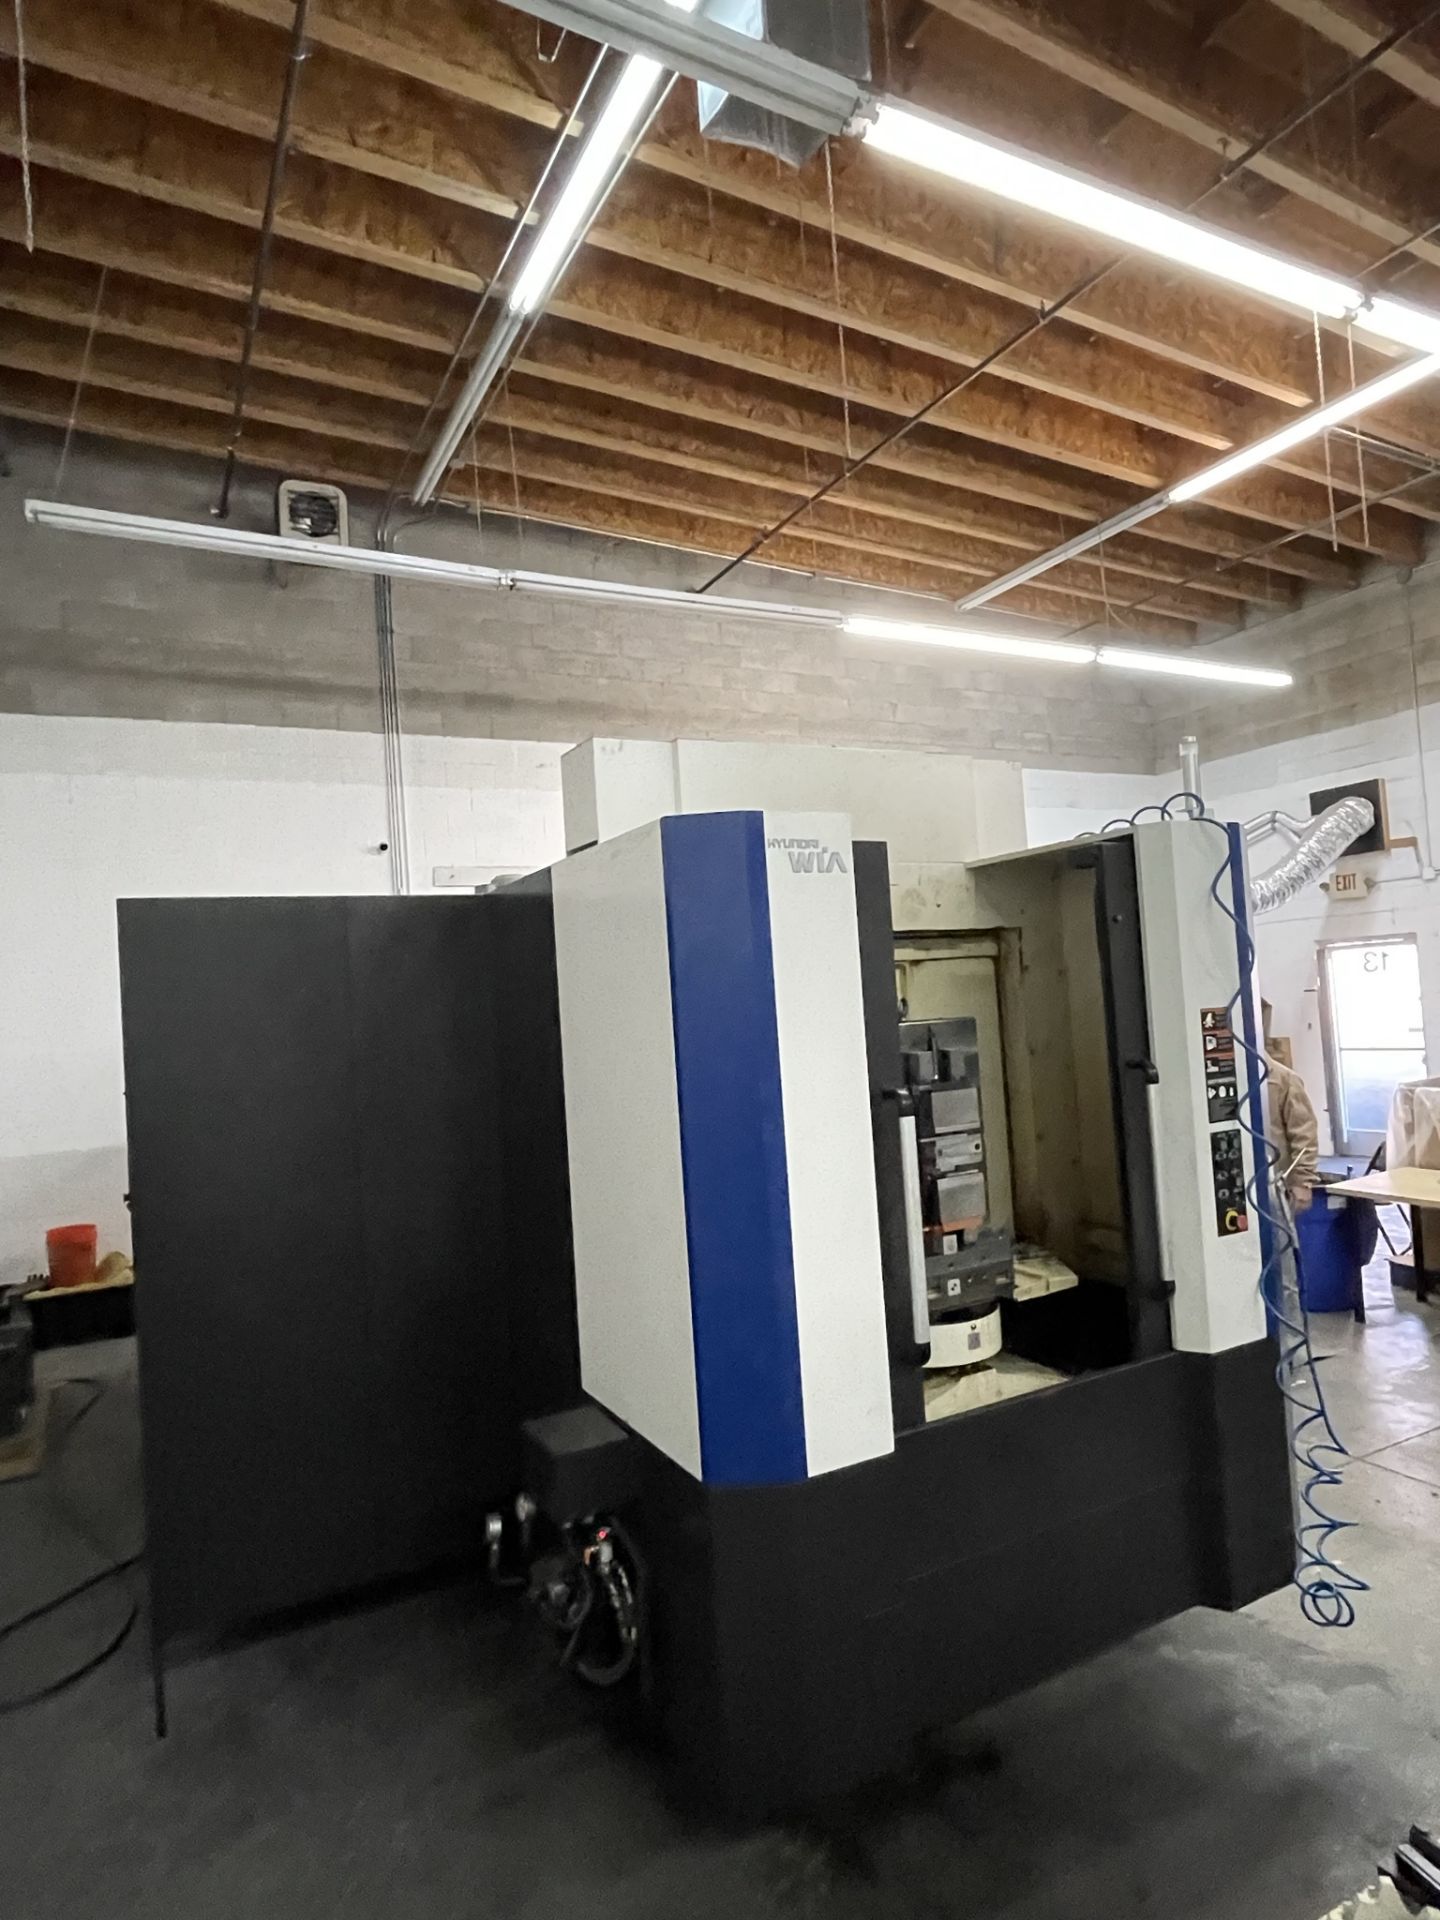 2013 Hyundai WIA HS4000i 4-Axis Horizontal Machining Center with Pallet Changer *1643 Cutting Hours* - Image 7 of 25